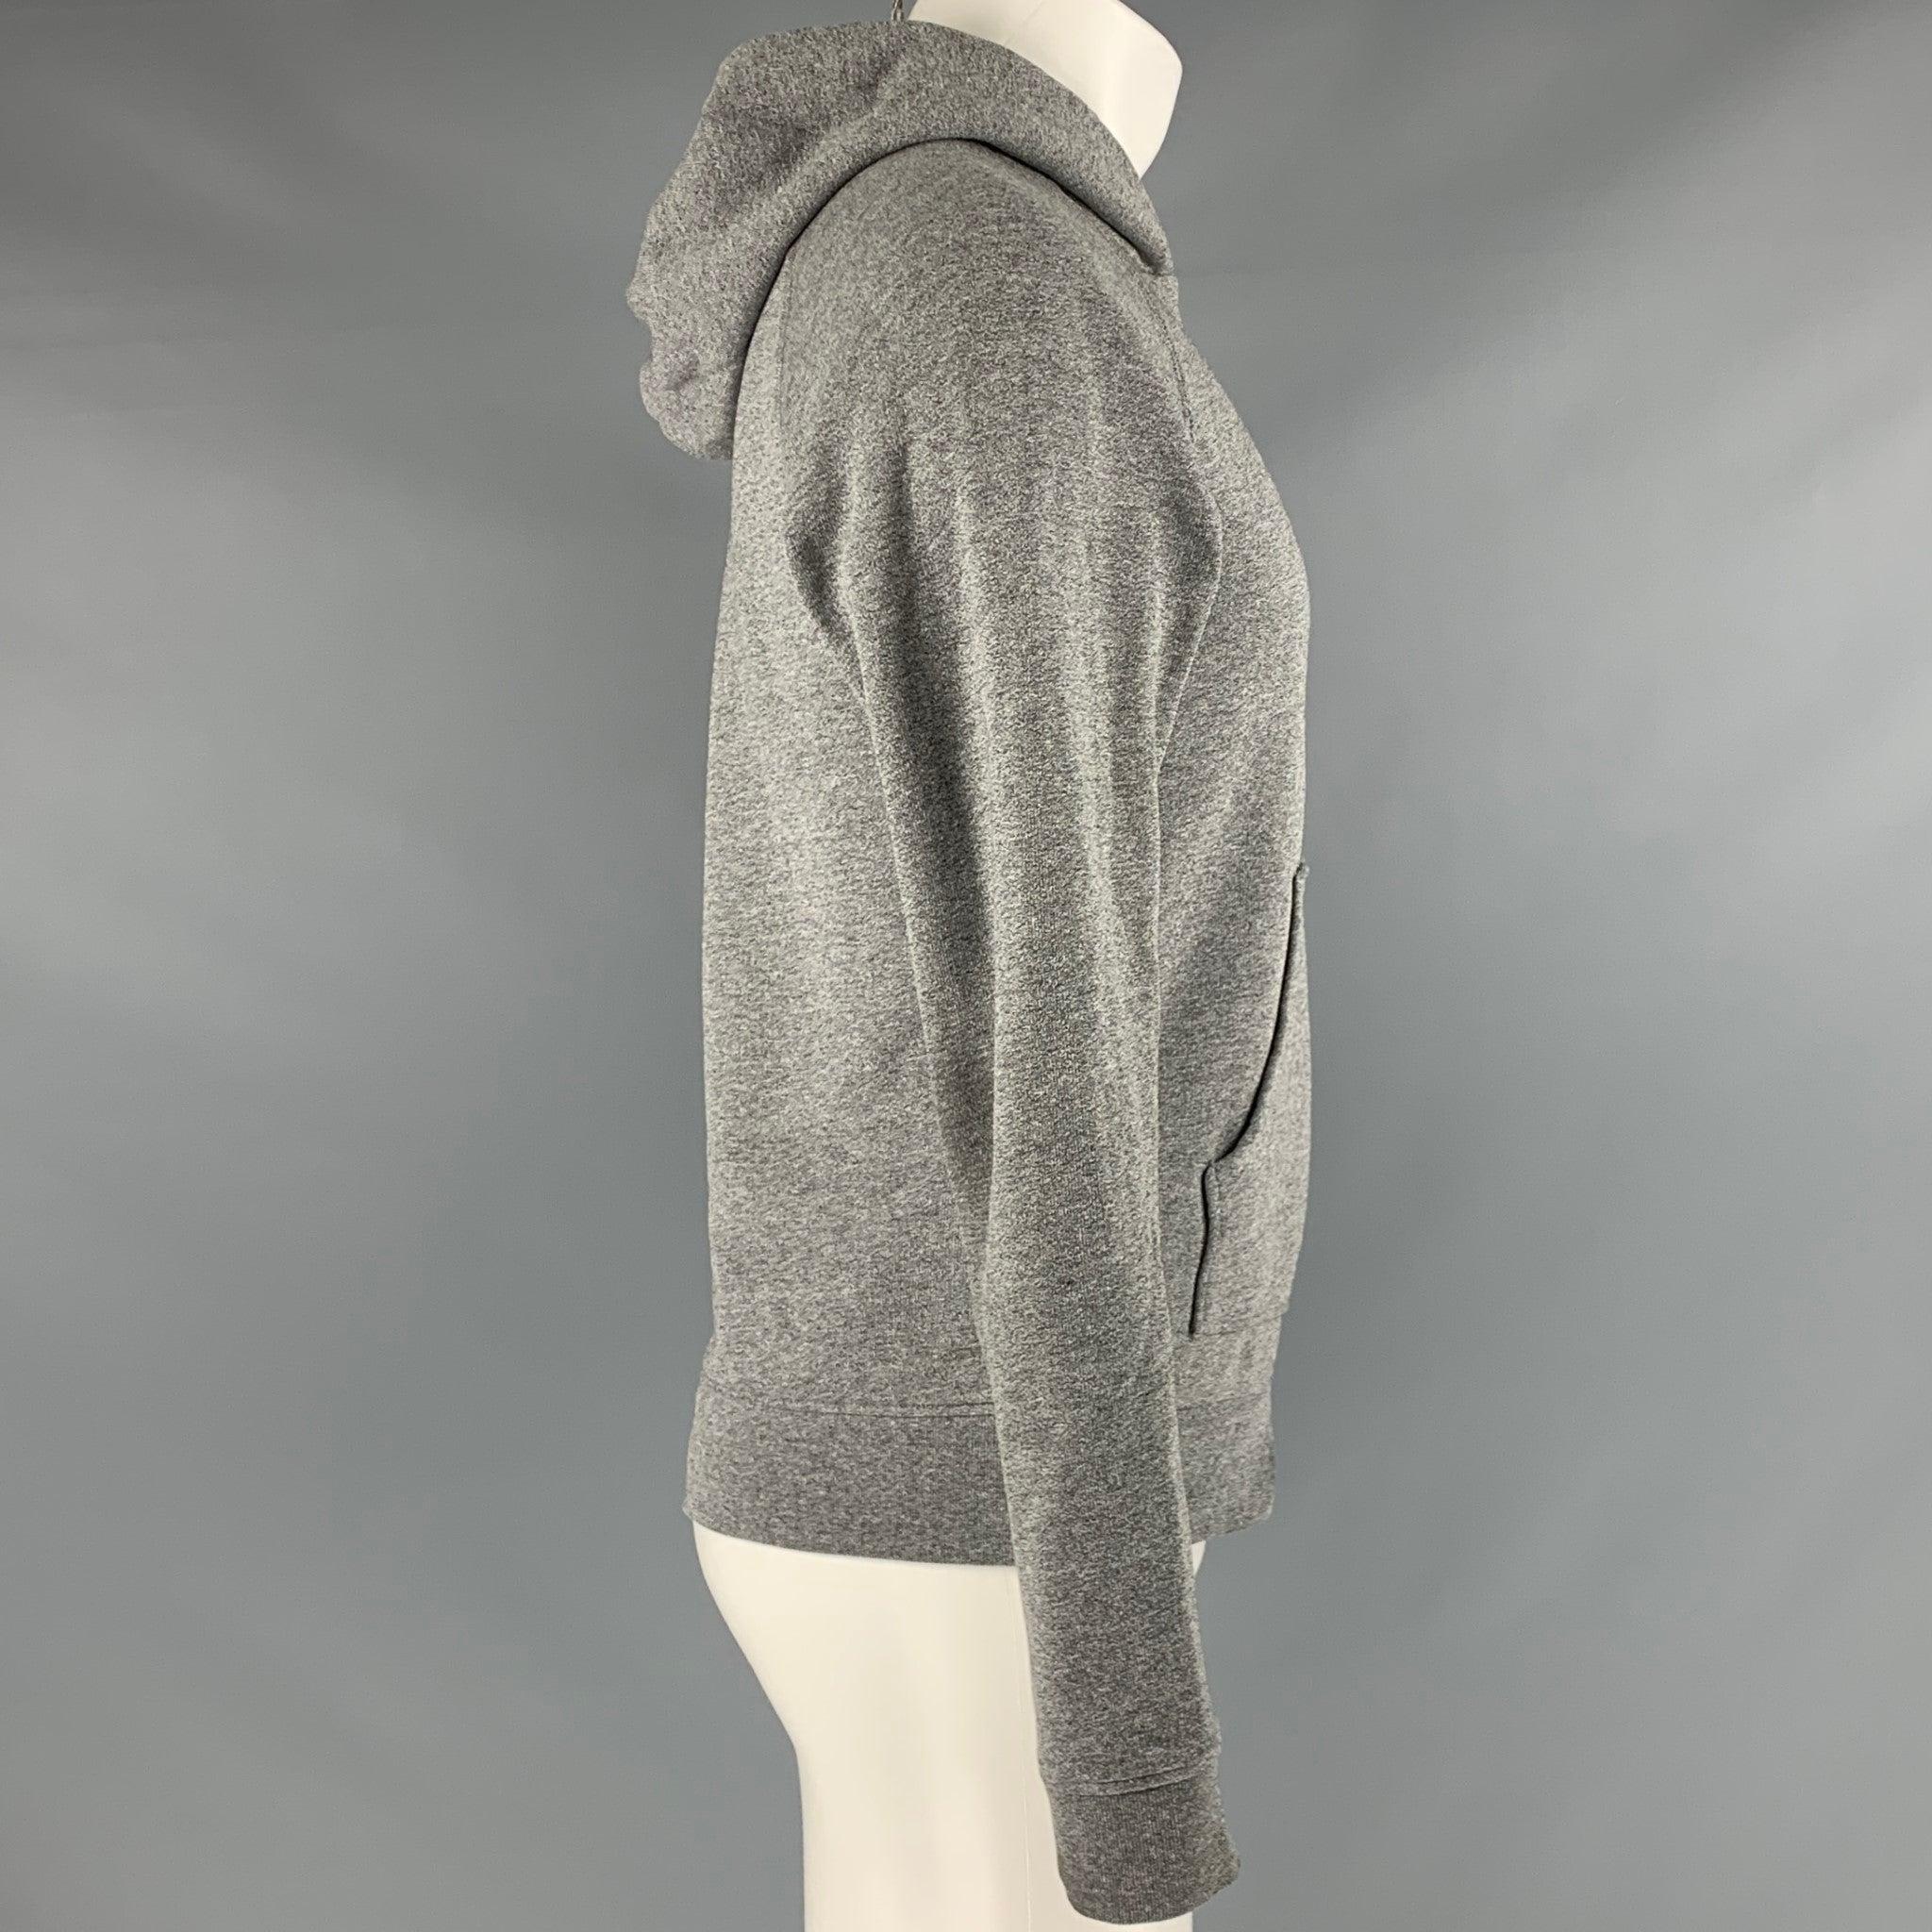 JOHN ELLIOTT sweatshirt
in a
heather grey cotton blend fabric featuring a hooded style, and kangaroo pockets. Made in USA.Very Good Pre-Owned Condition. Signs of wear at the cuffs. 

Marked:   1 

Measurements: 
 
Shoulder: 17.5 inches Chest: 39